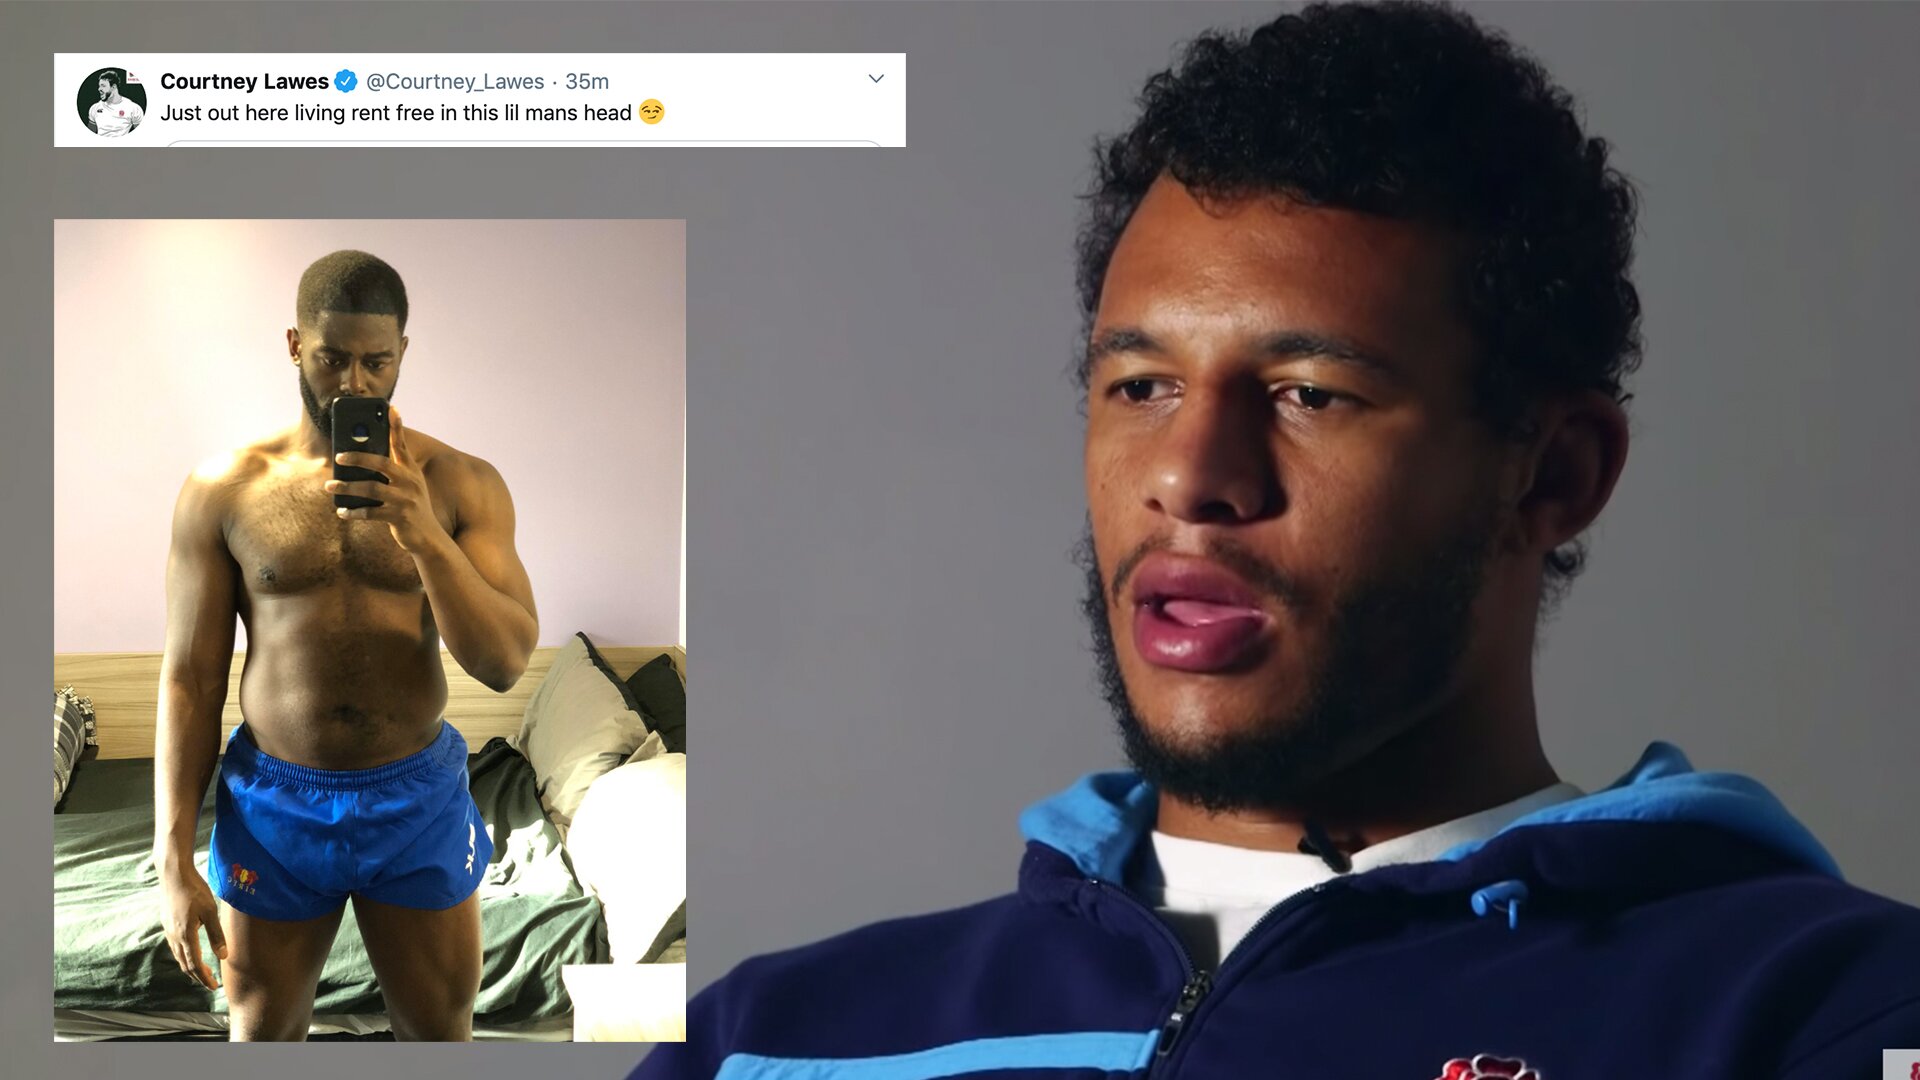 Courtney Lawes is actively trolling his haters online as they attack him for his beliefs